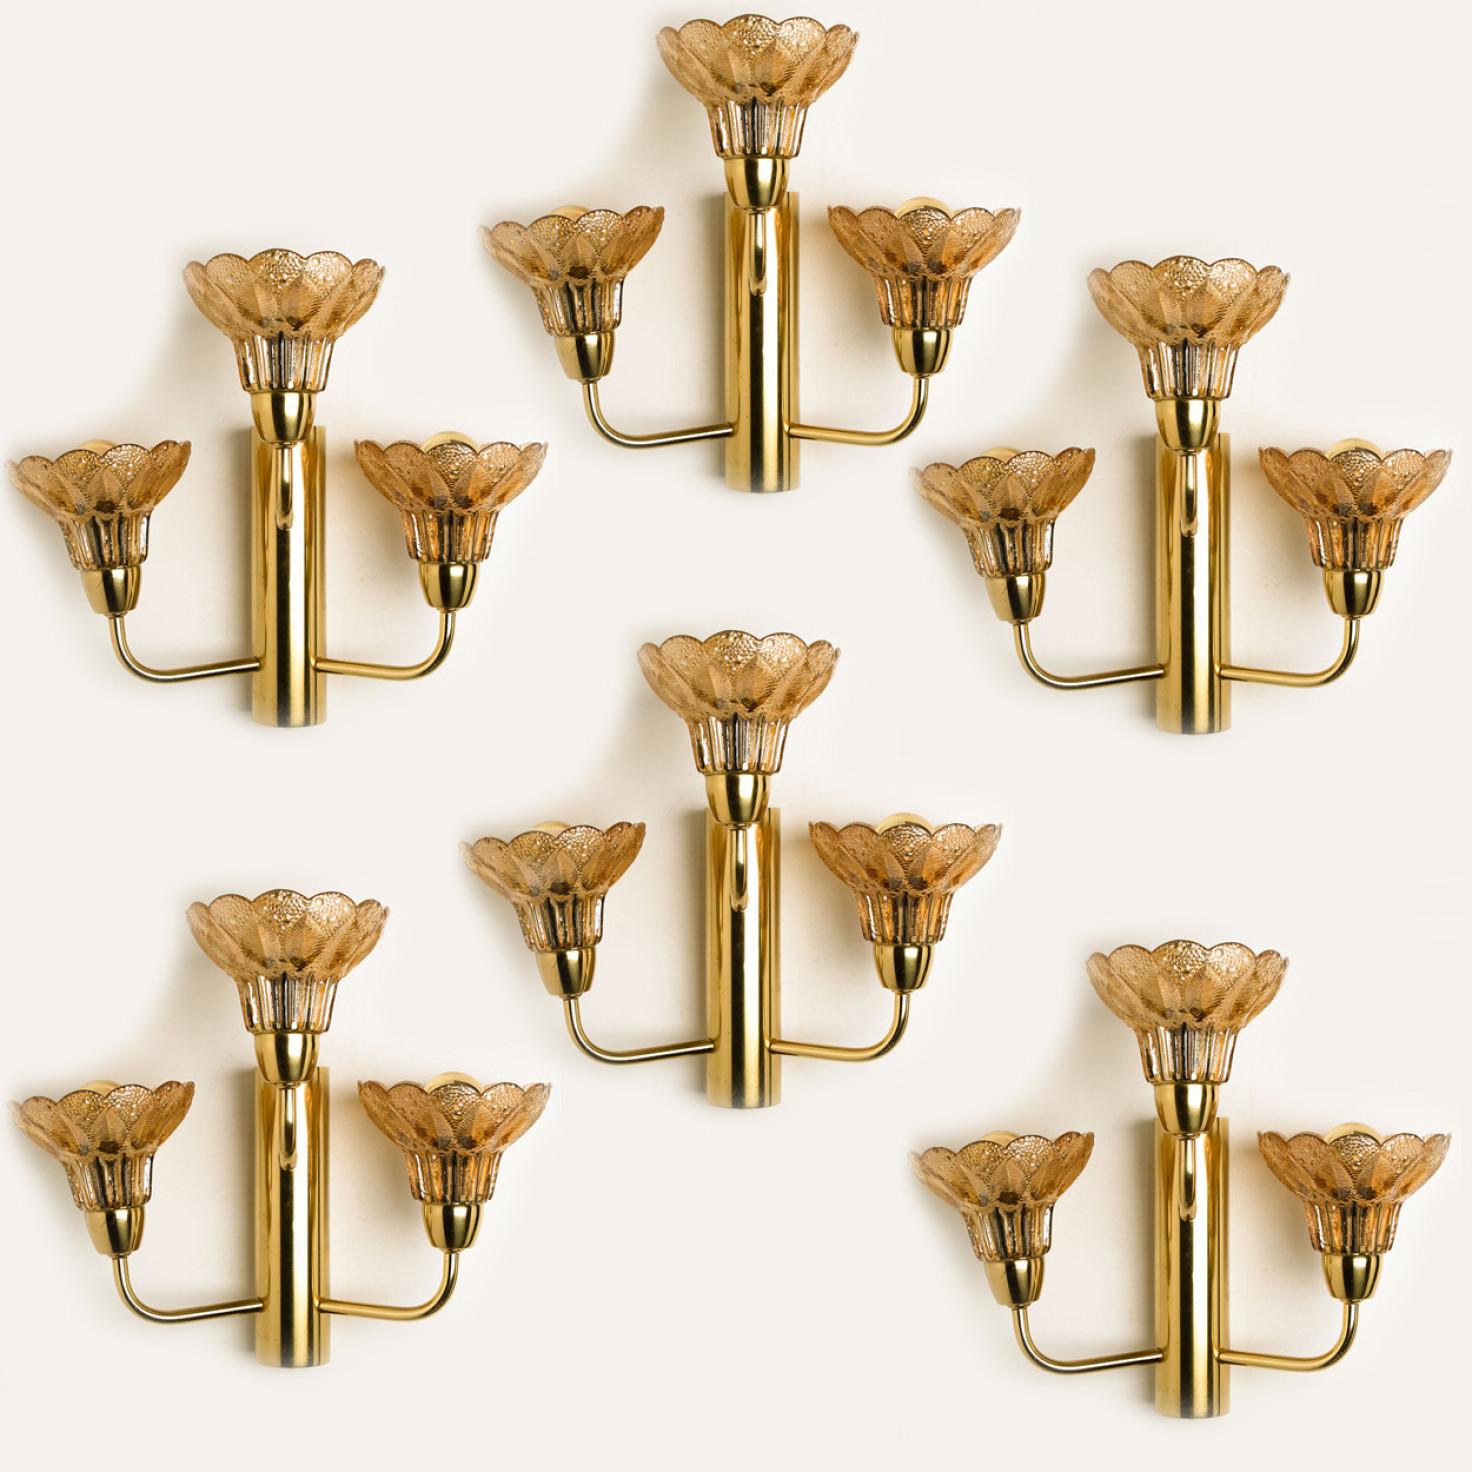 Several Flower Glass and Brass Wall Sconces, Germany, 1960s For Sale 2